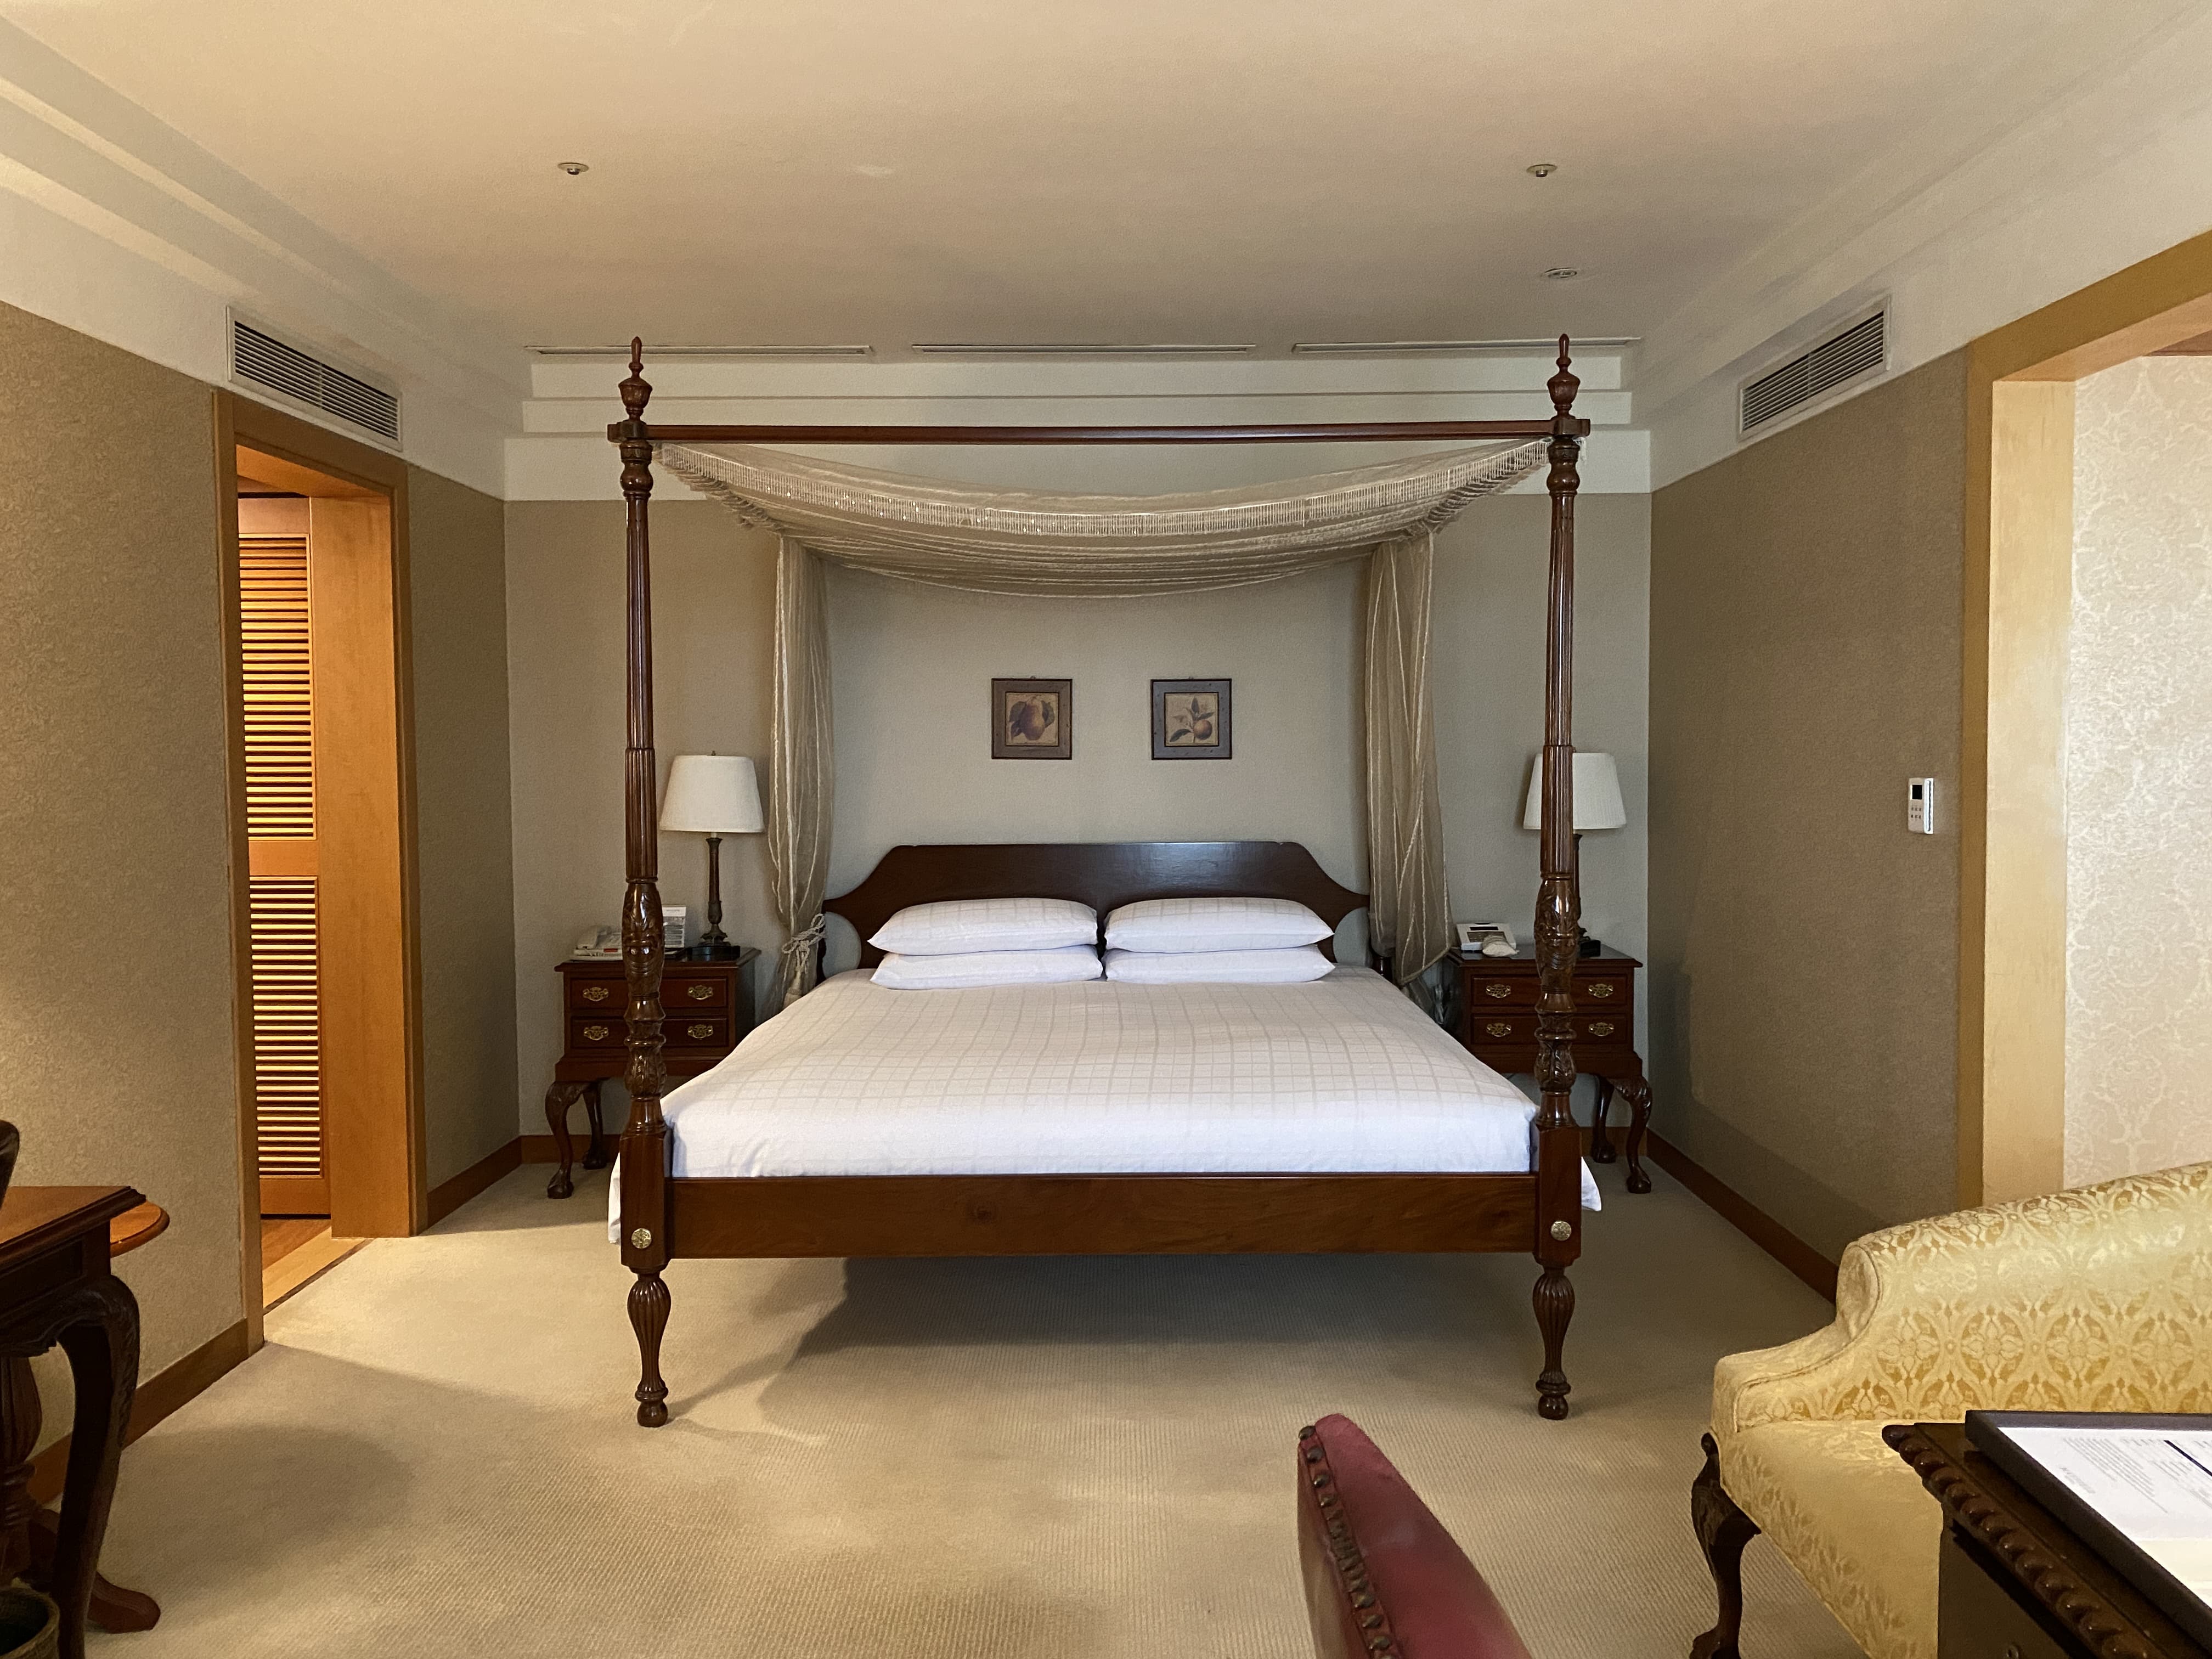 James II Suite guest room0 : A guest room with a wooden framed large bed